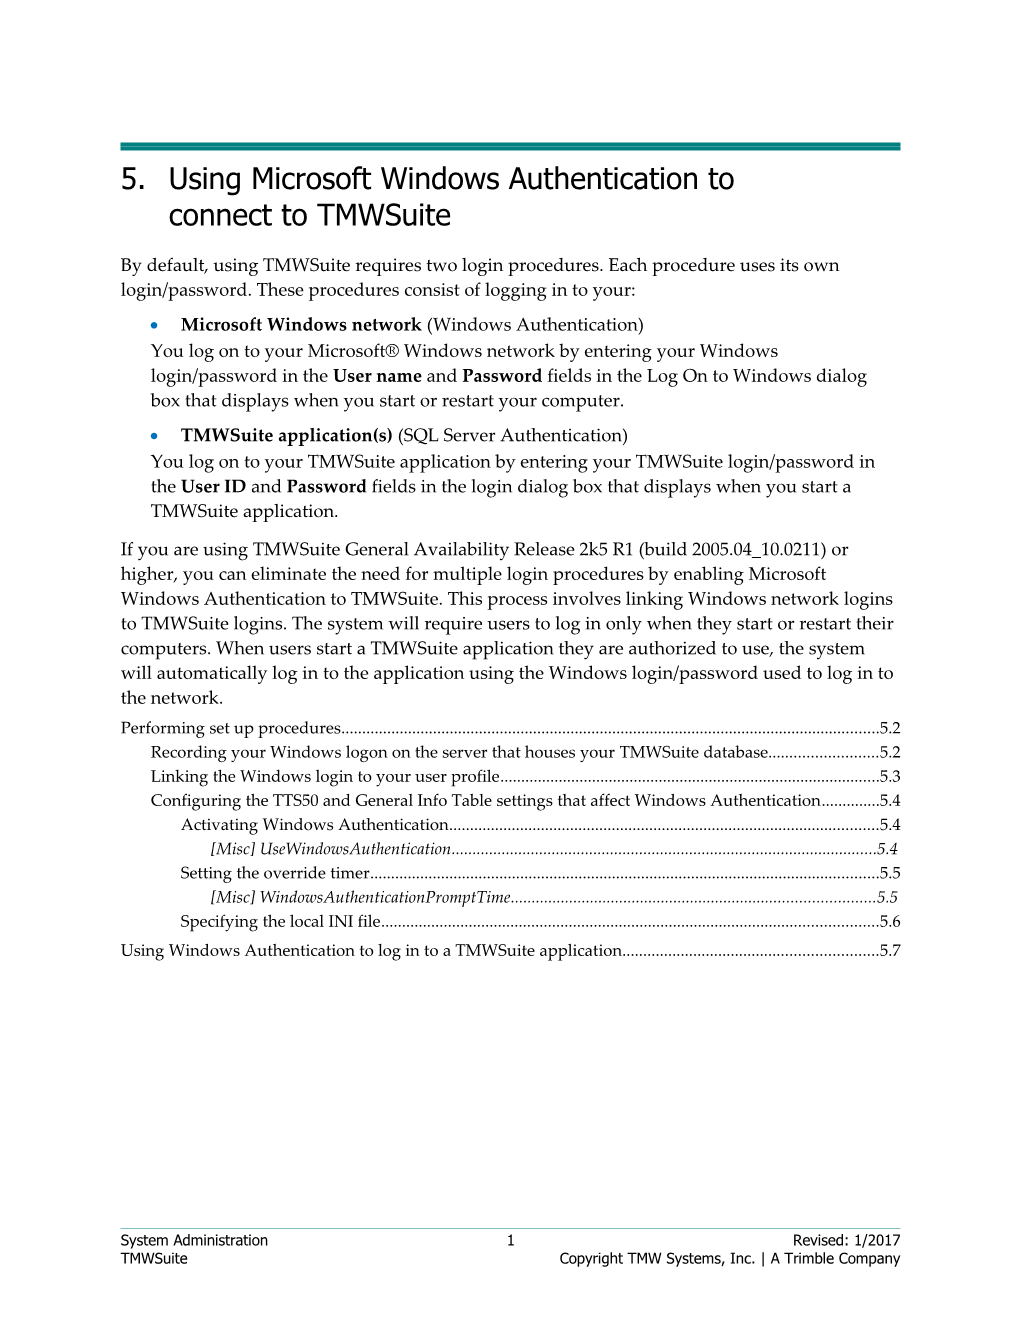 Using Microsoft Windows Authentication to Connect to Tmwsuite